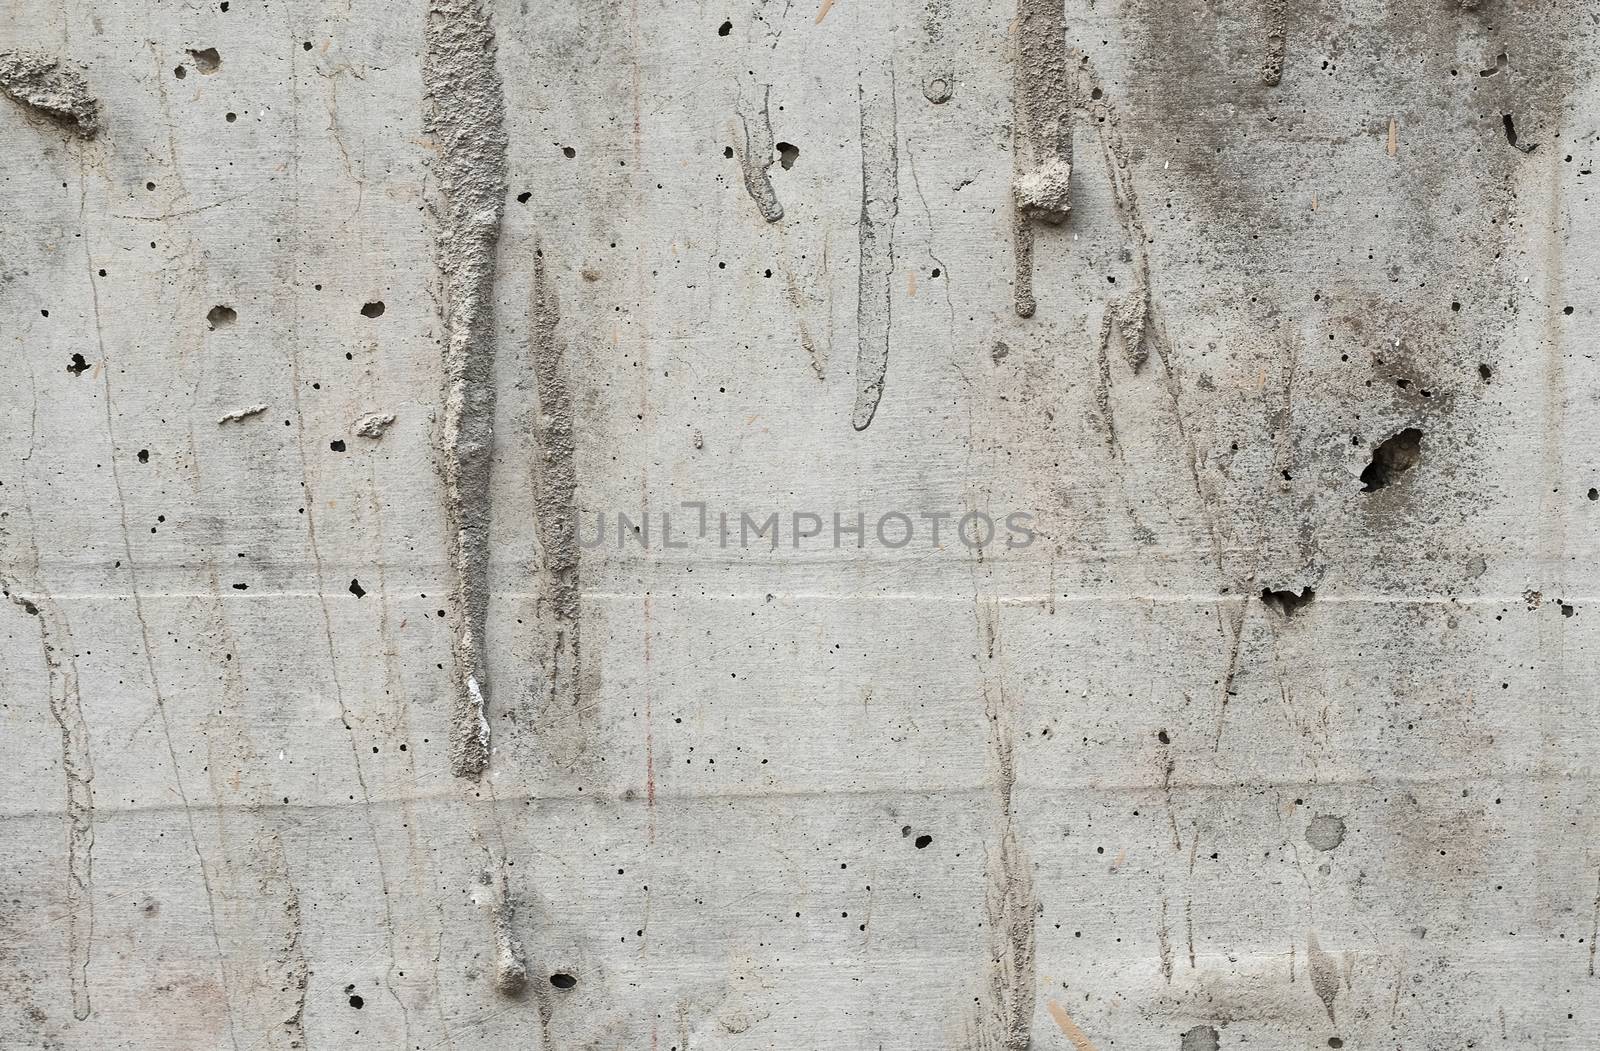 rough concrete textures background by Nawoot